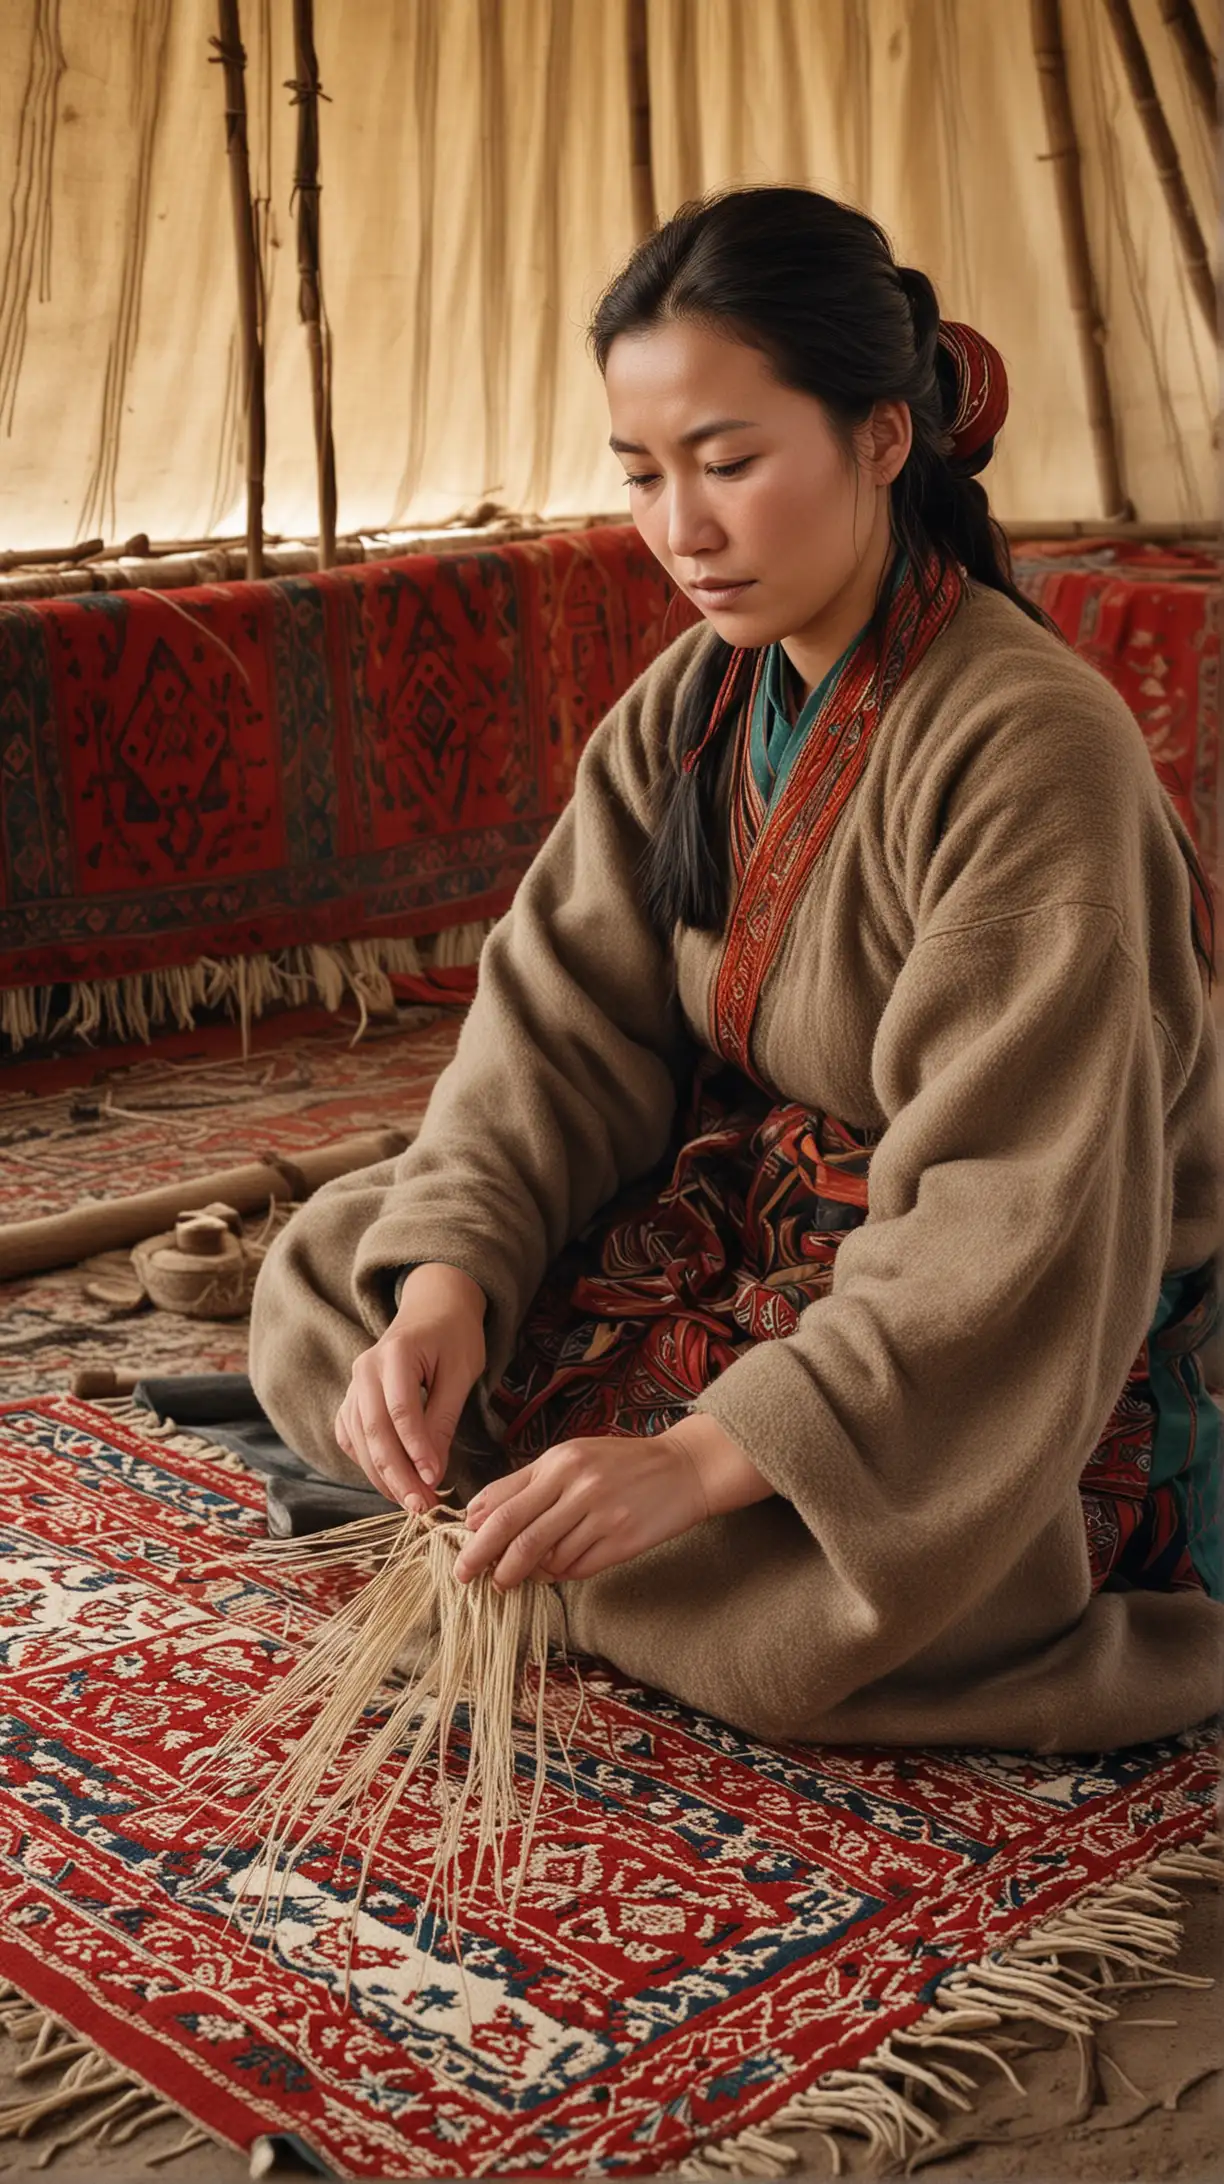 Mongol Woman Weaving Intricate Patterns on Steppe Traditional Felt Carpet Crafting